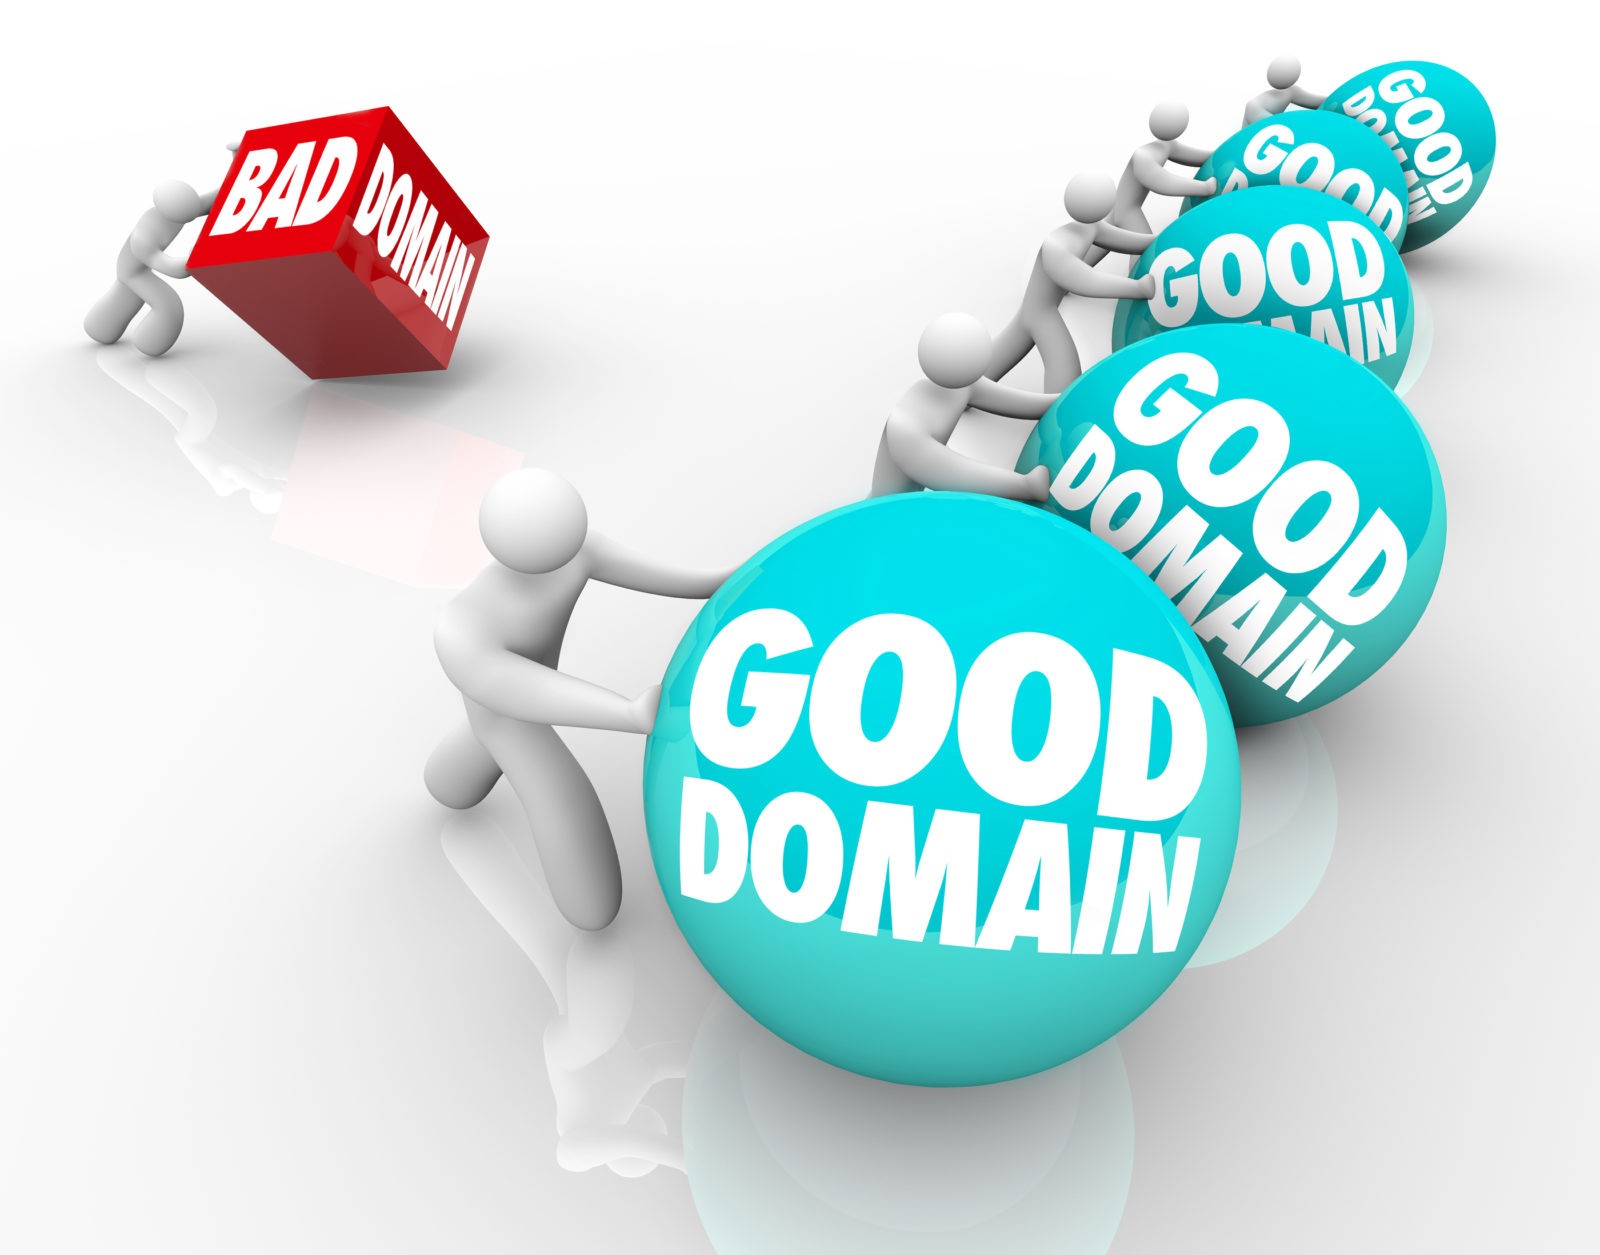 Domain-Name-as-an-Internet-Marketing-Tool-for-Your-Business